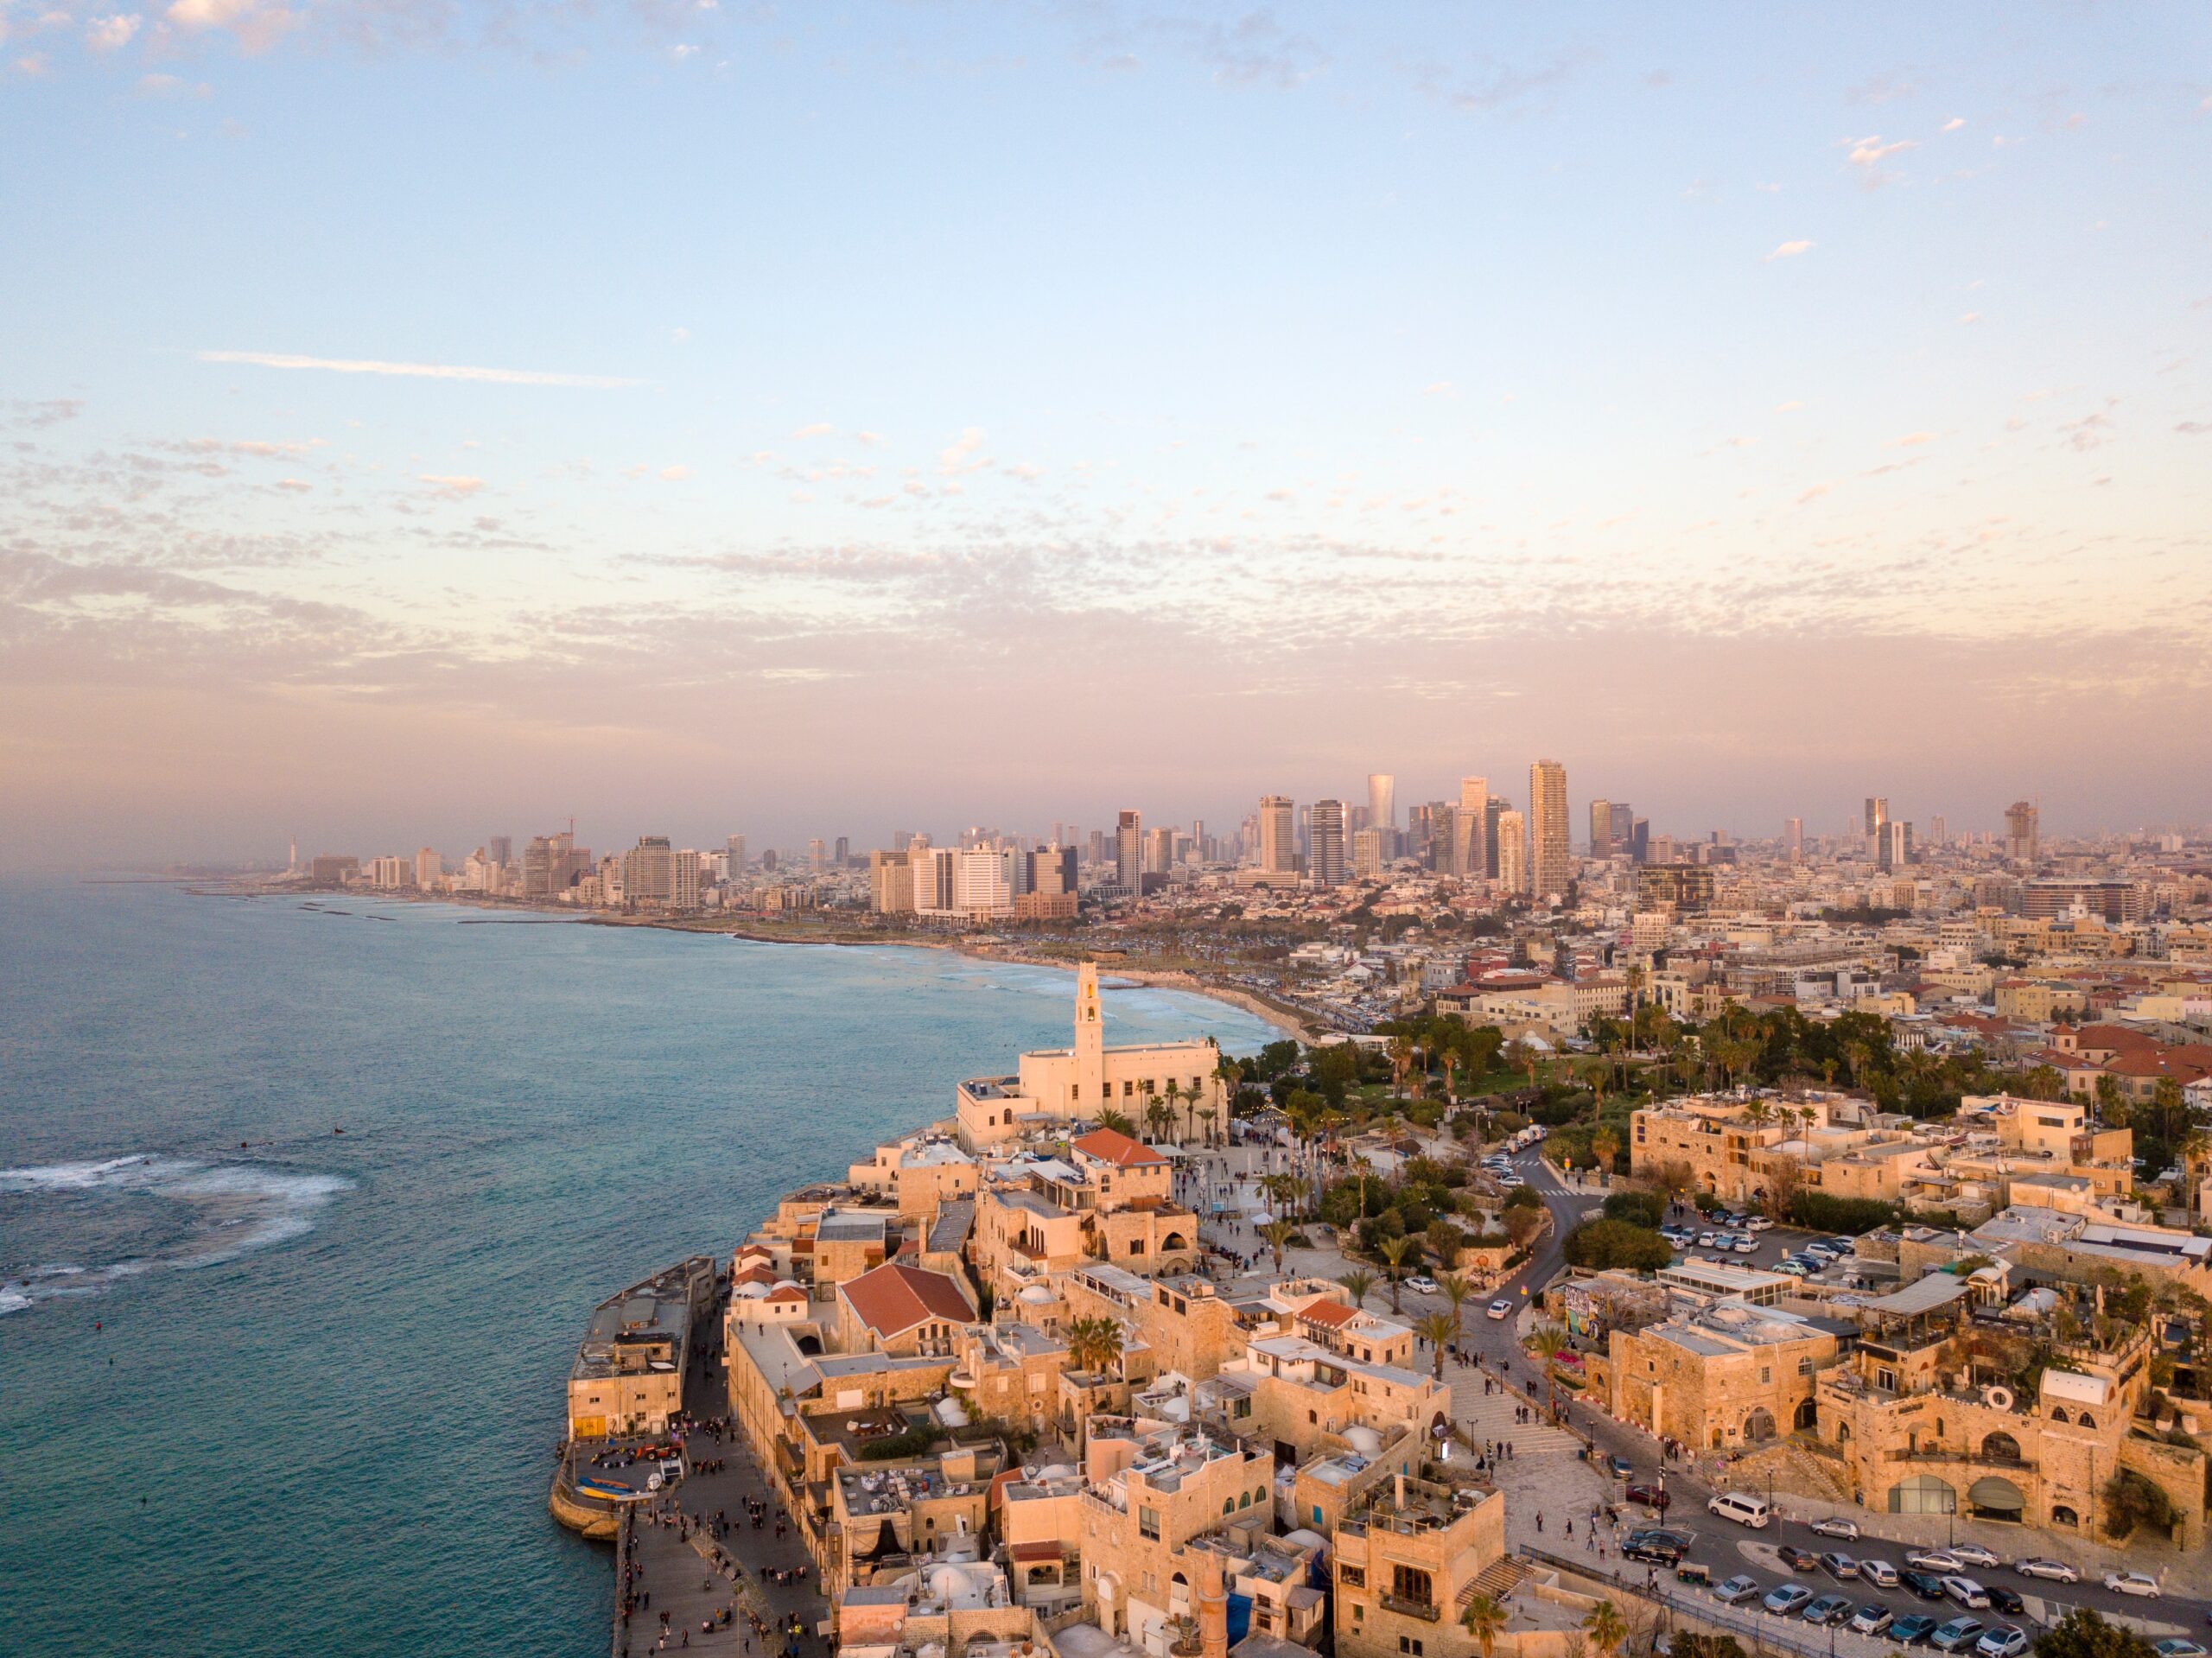 a skyline in Israel, overlooking the Sea